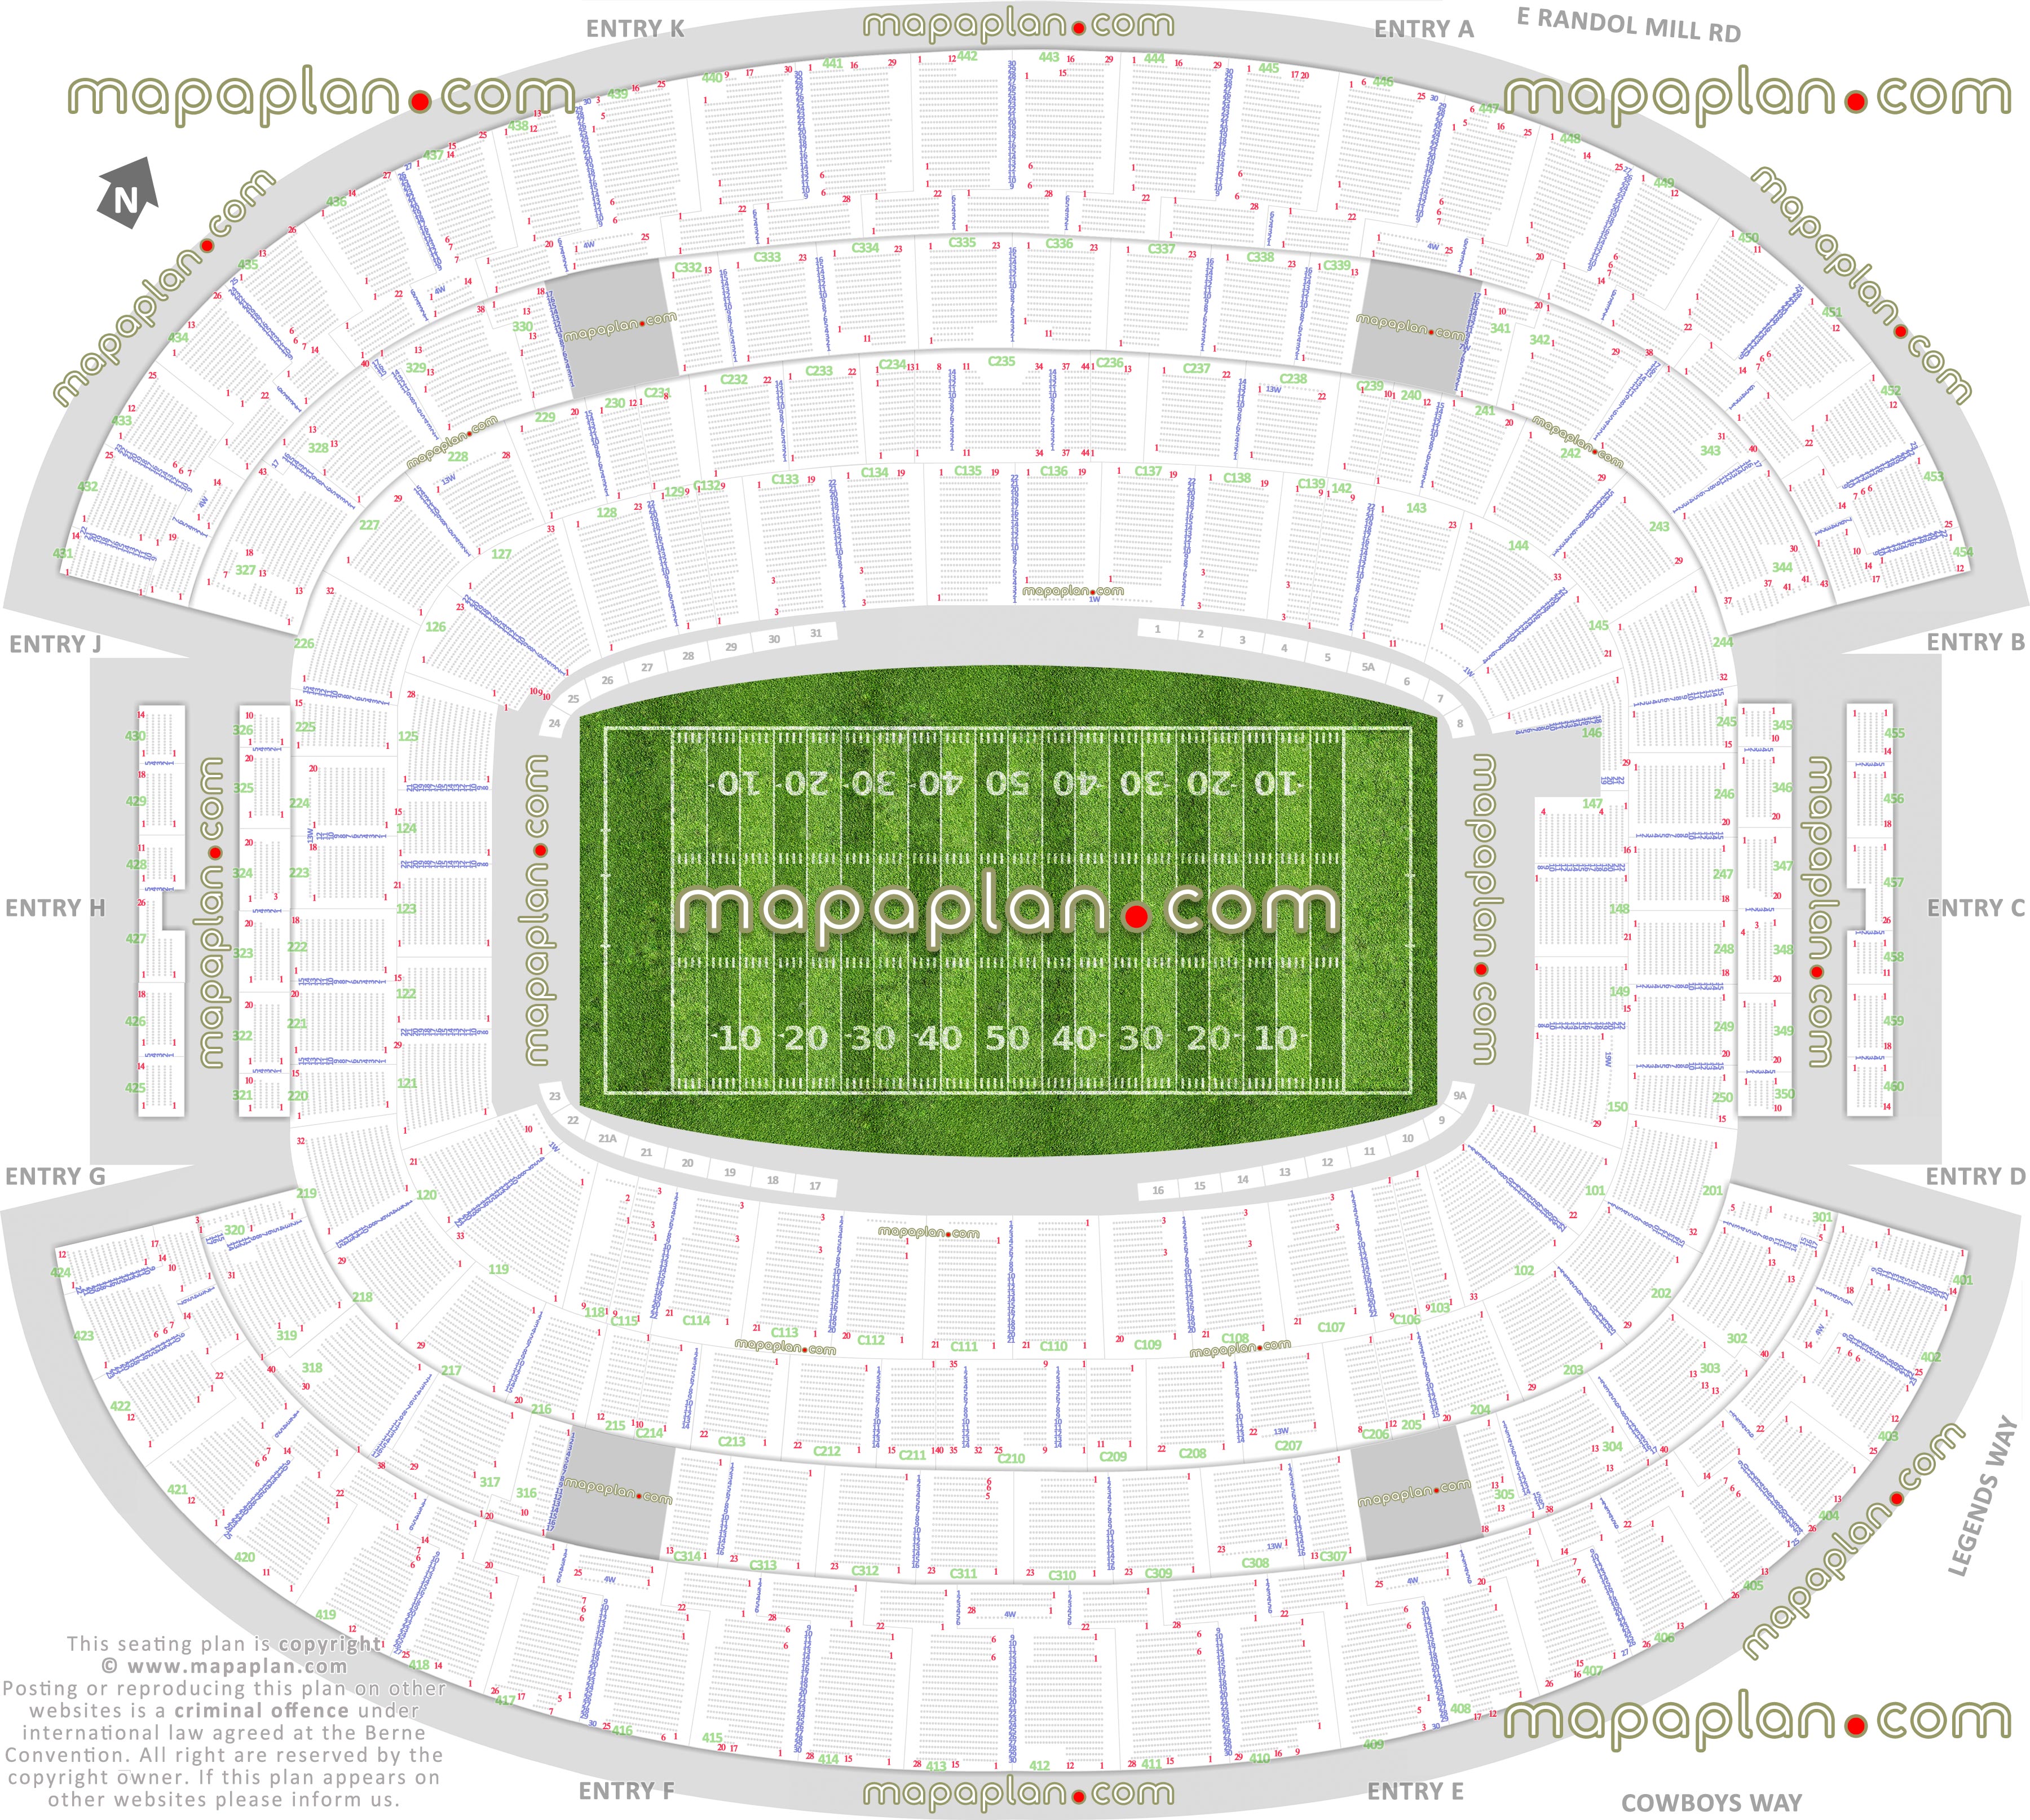 dallas cowboys stadium football plan nfl ncaa college games arena diagram individual find seat locator seats row best seats rows numbered hall fame main mezzanine upper concourse club level sections 101 102 103 106 107 108 109 110 111 112 113 114 115 118 119 120 121 122 123 124 125 126 127 143 144 Dallas Cowboys AT&T Stadium seating chart